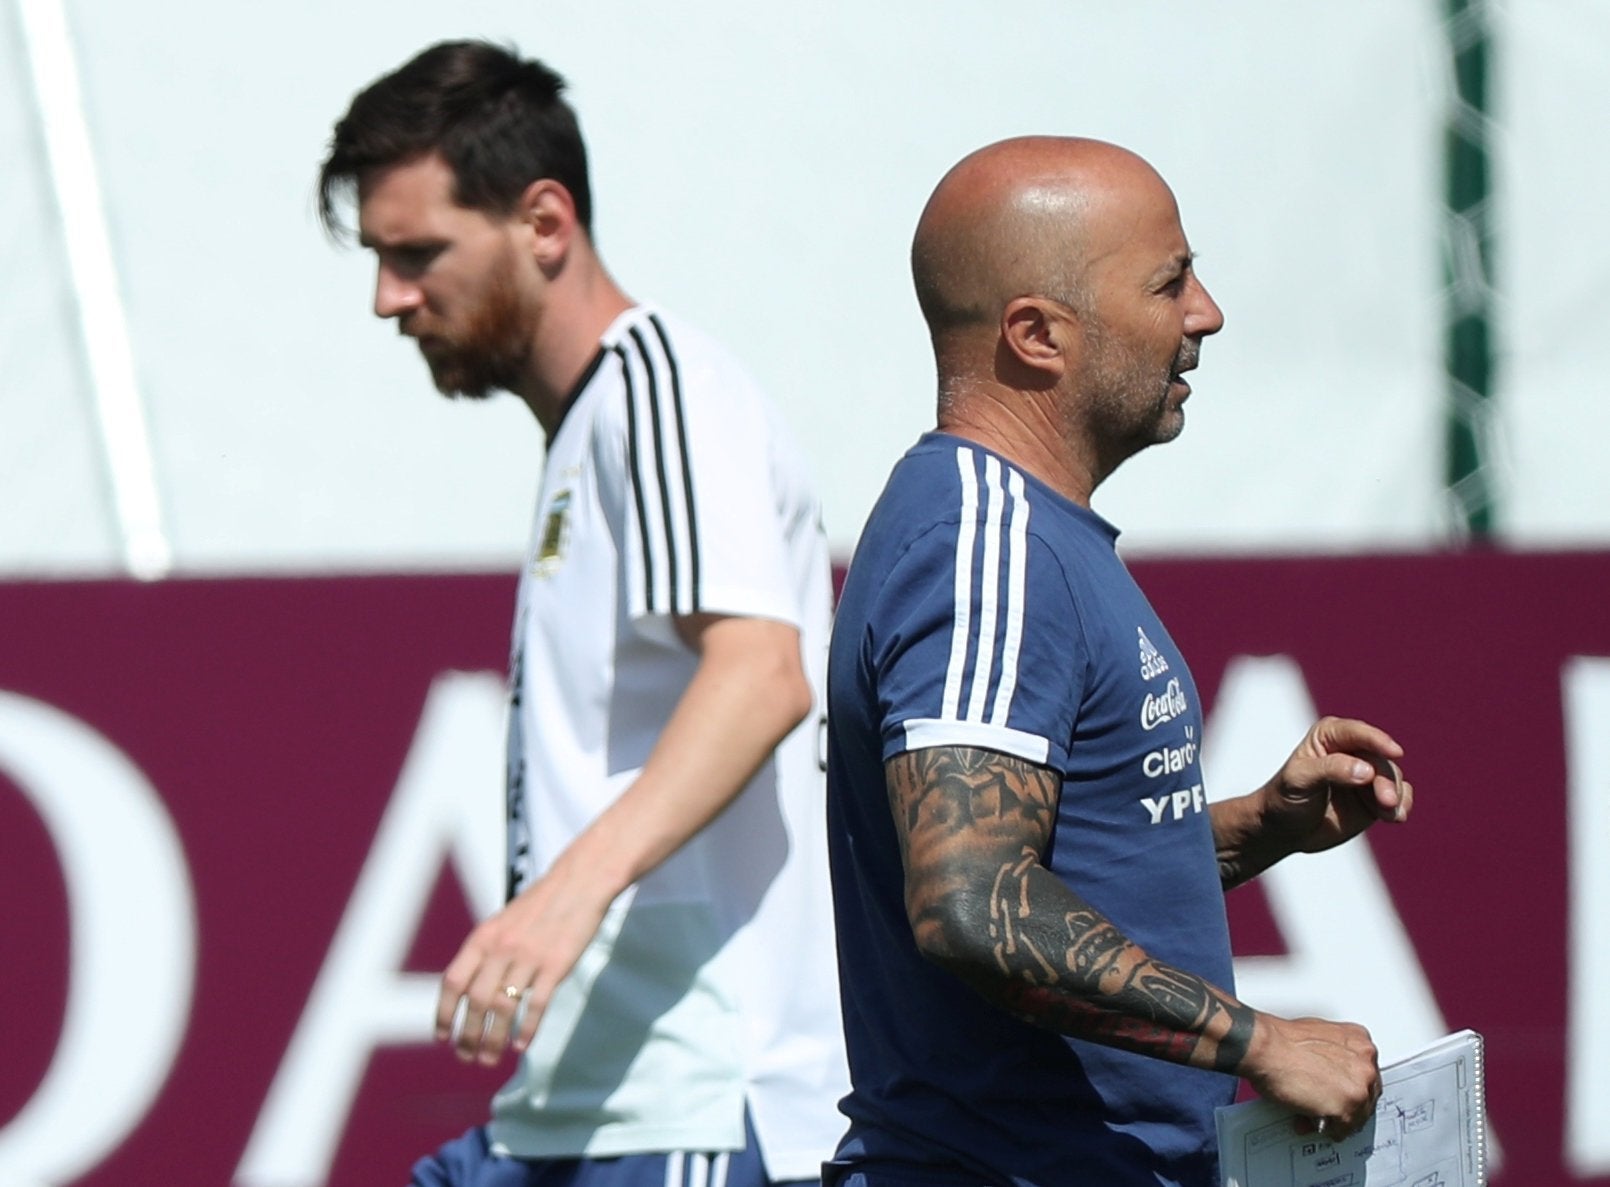 Coach Jorge Sampaoli's tactics and use of Messi have come in for stiff criticism